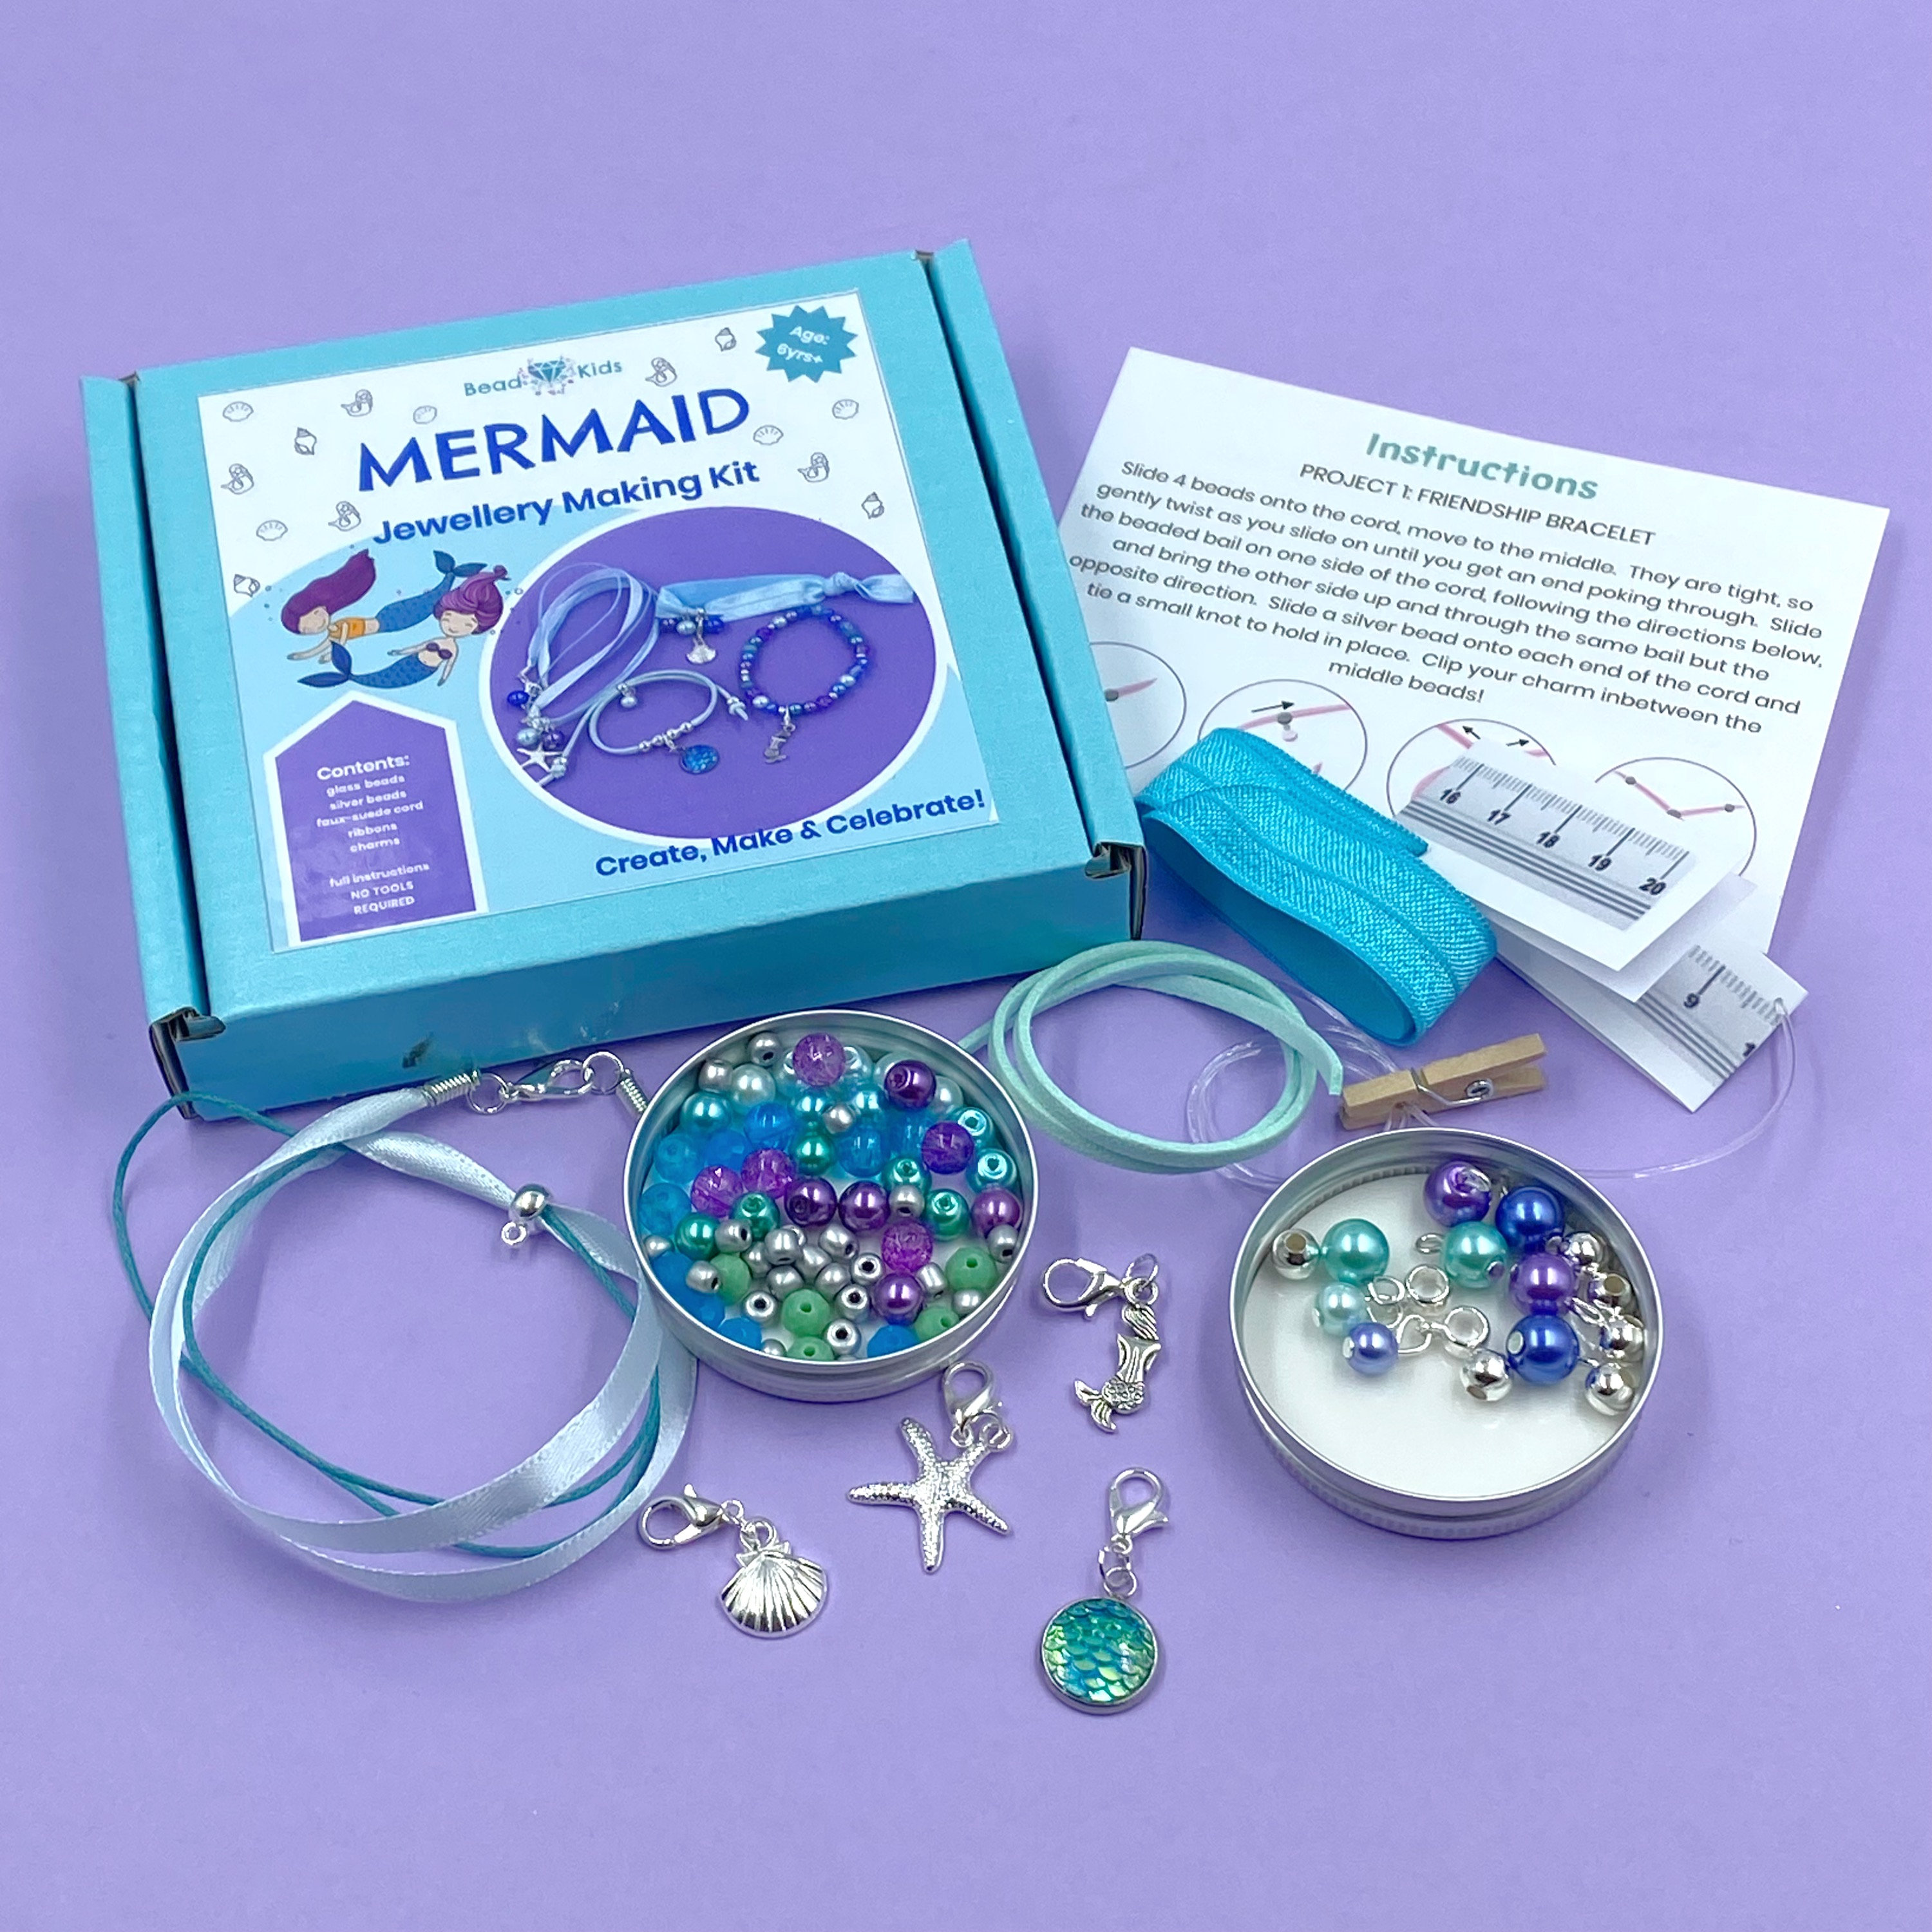 3 Bees & Me Mermaid Sewing Kit for Kids Fun Mermaid Crafts for Girls and Boys Complete DIY Doll Making Gift for Ages 7 to 15